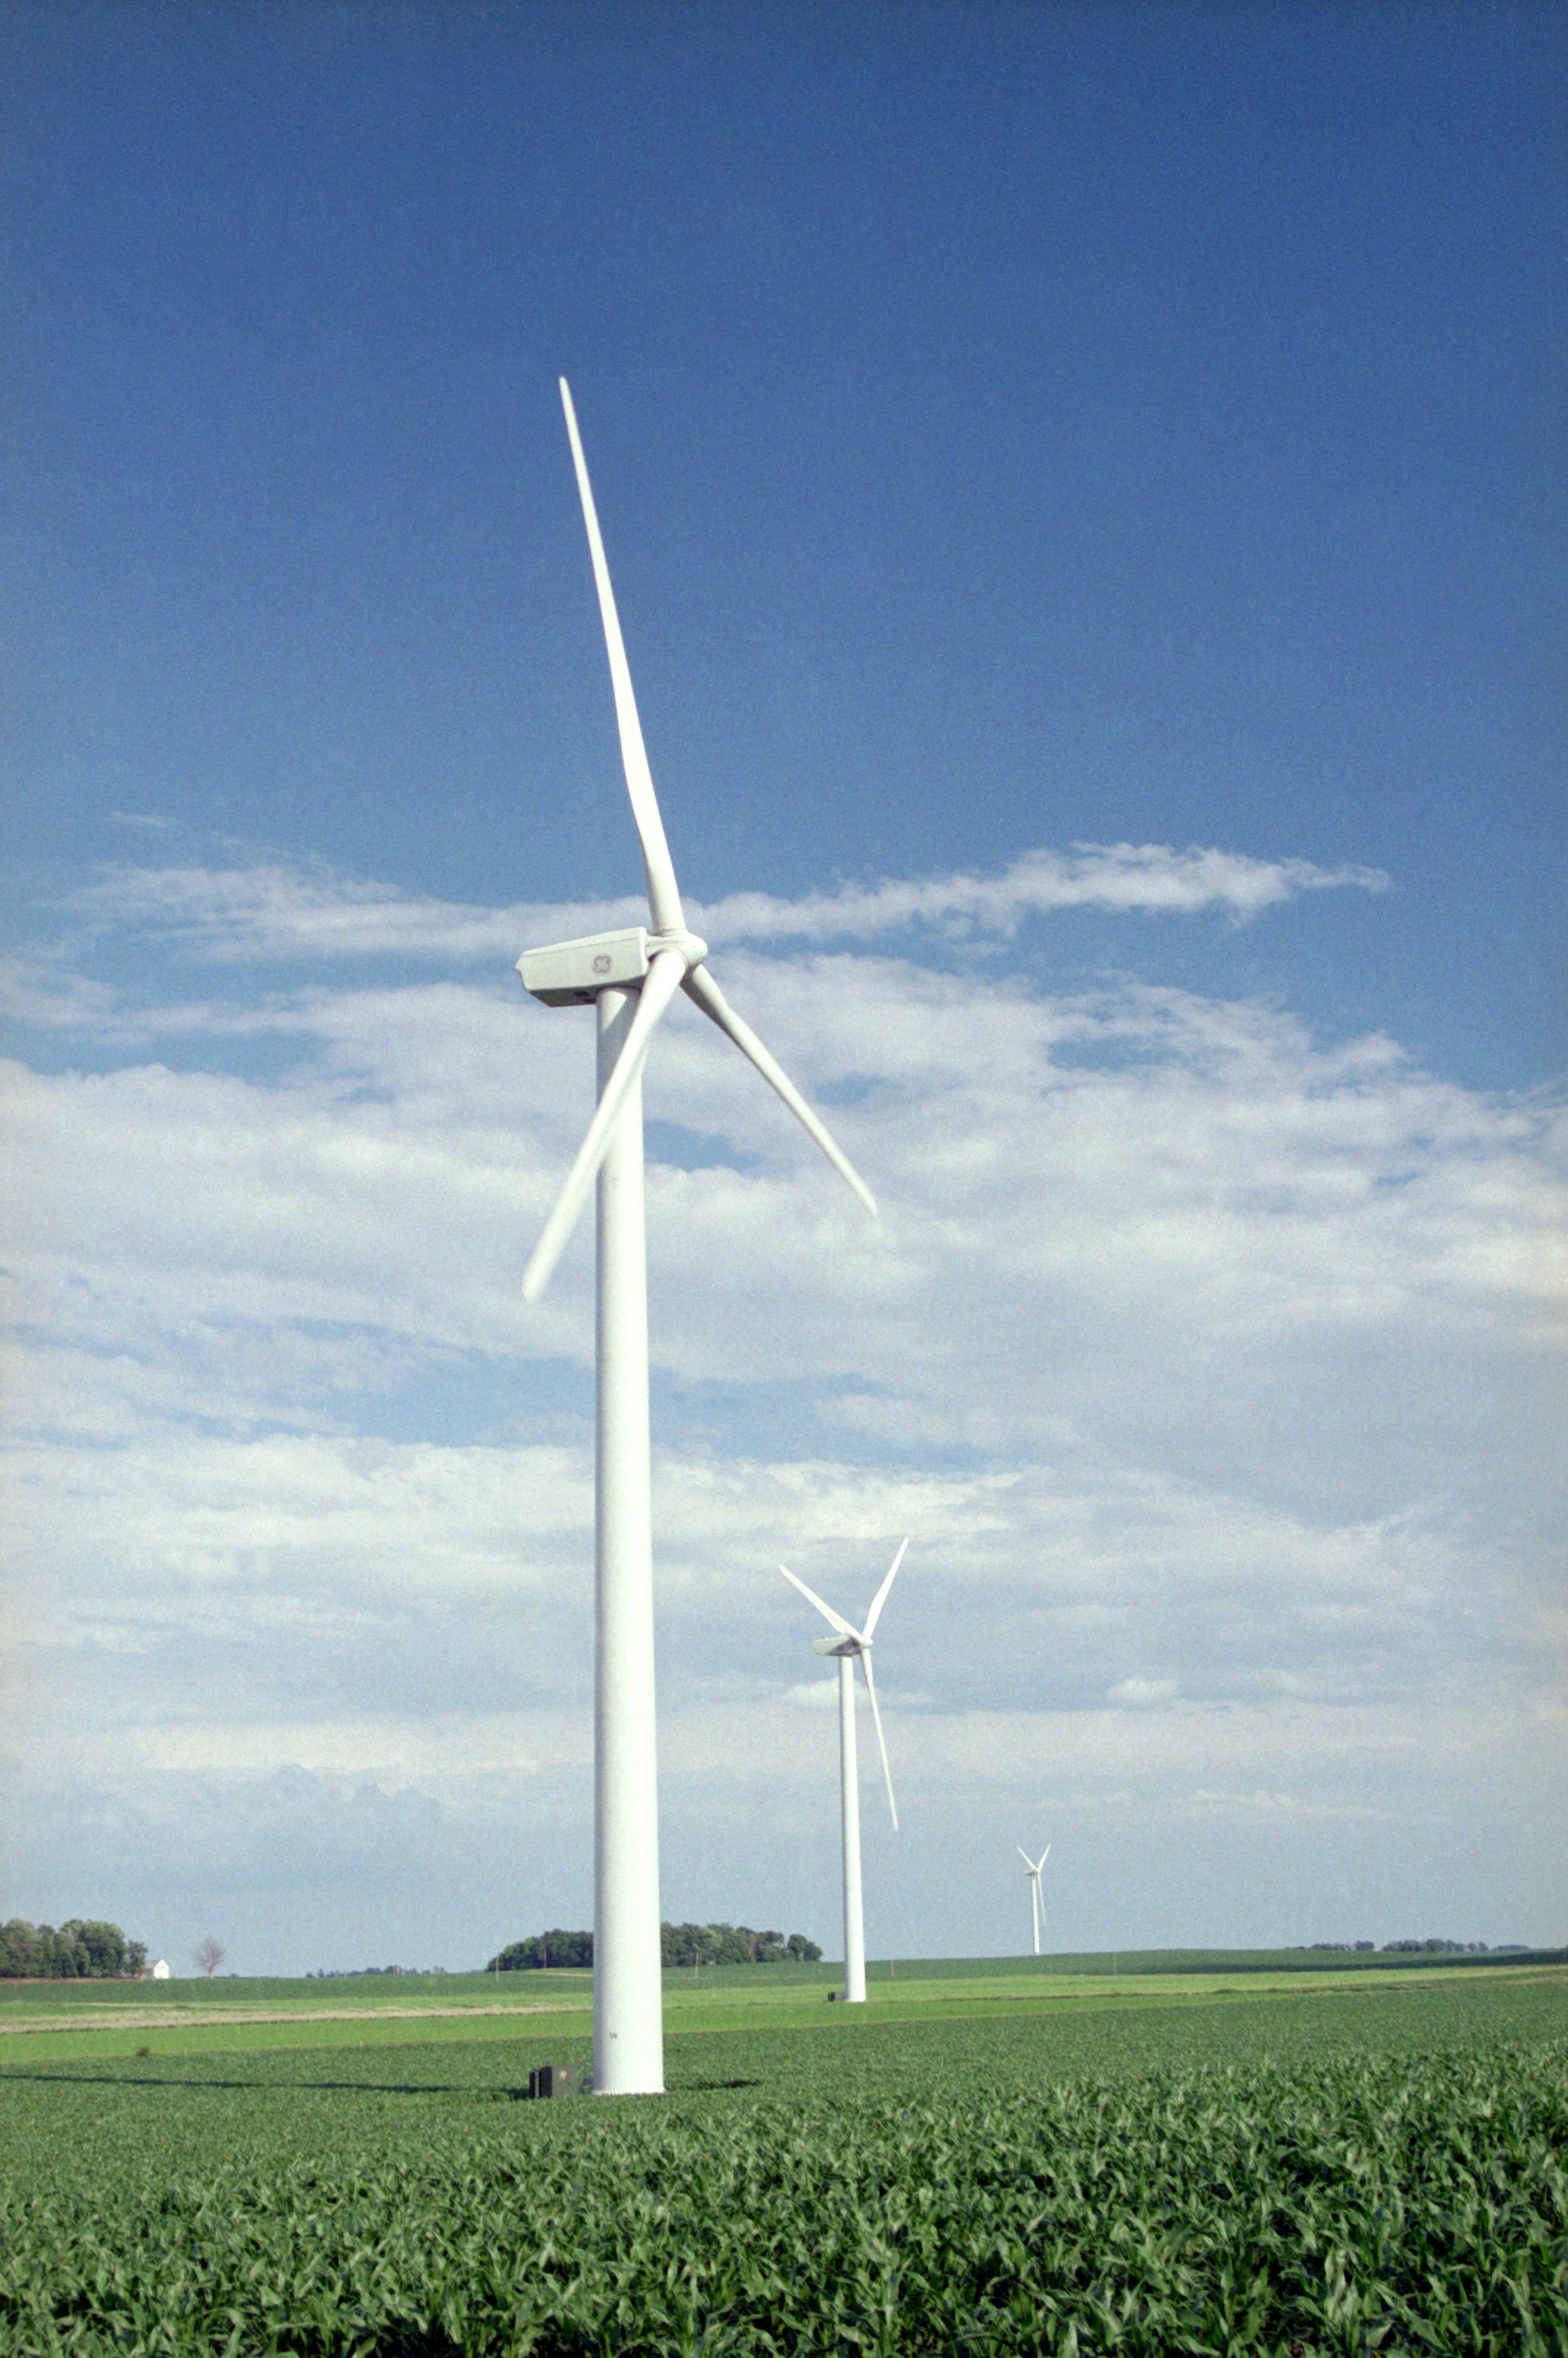 The detrimental effects of high wind speed on wind turbines